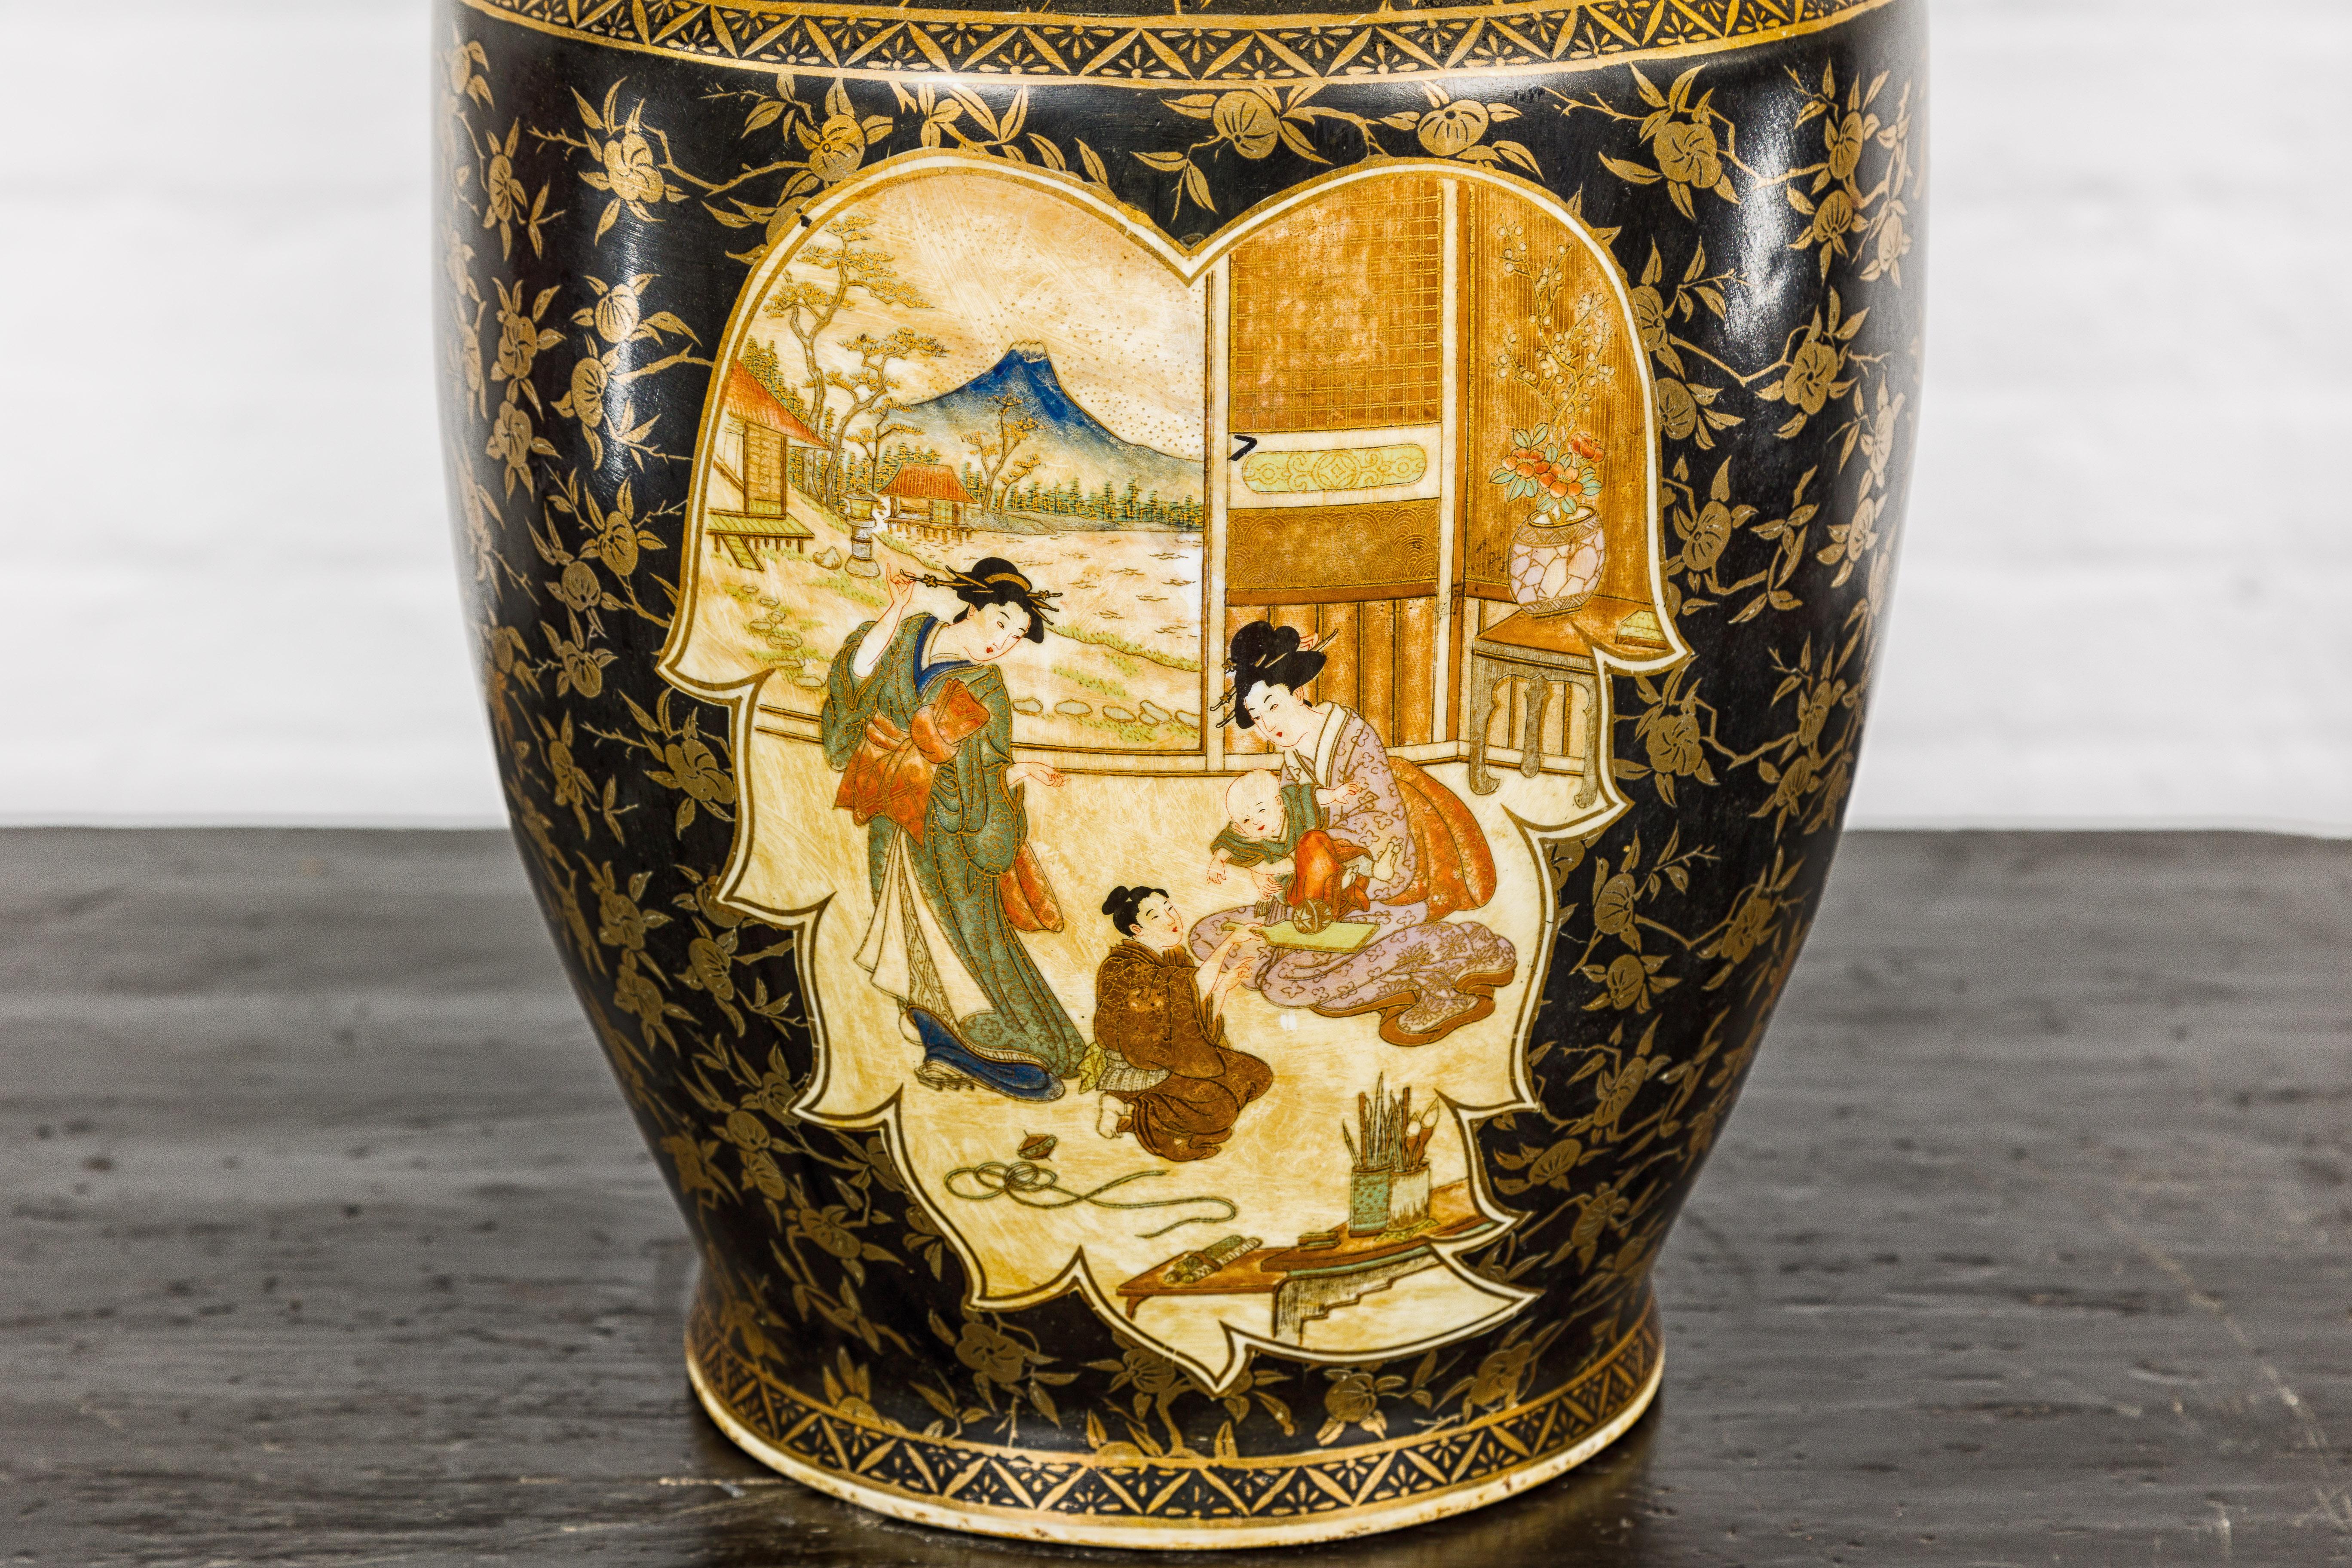 Japanese Inspired Black and Gold Vase with Family Scenes and Foo Dog Handles In Good Condition For Sale In Yonkers, NY